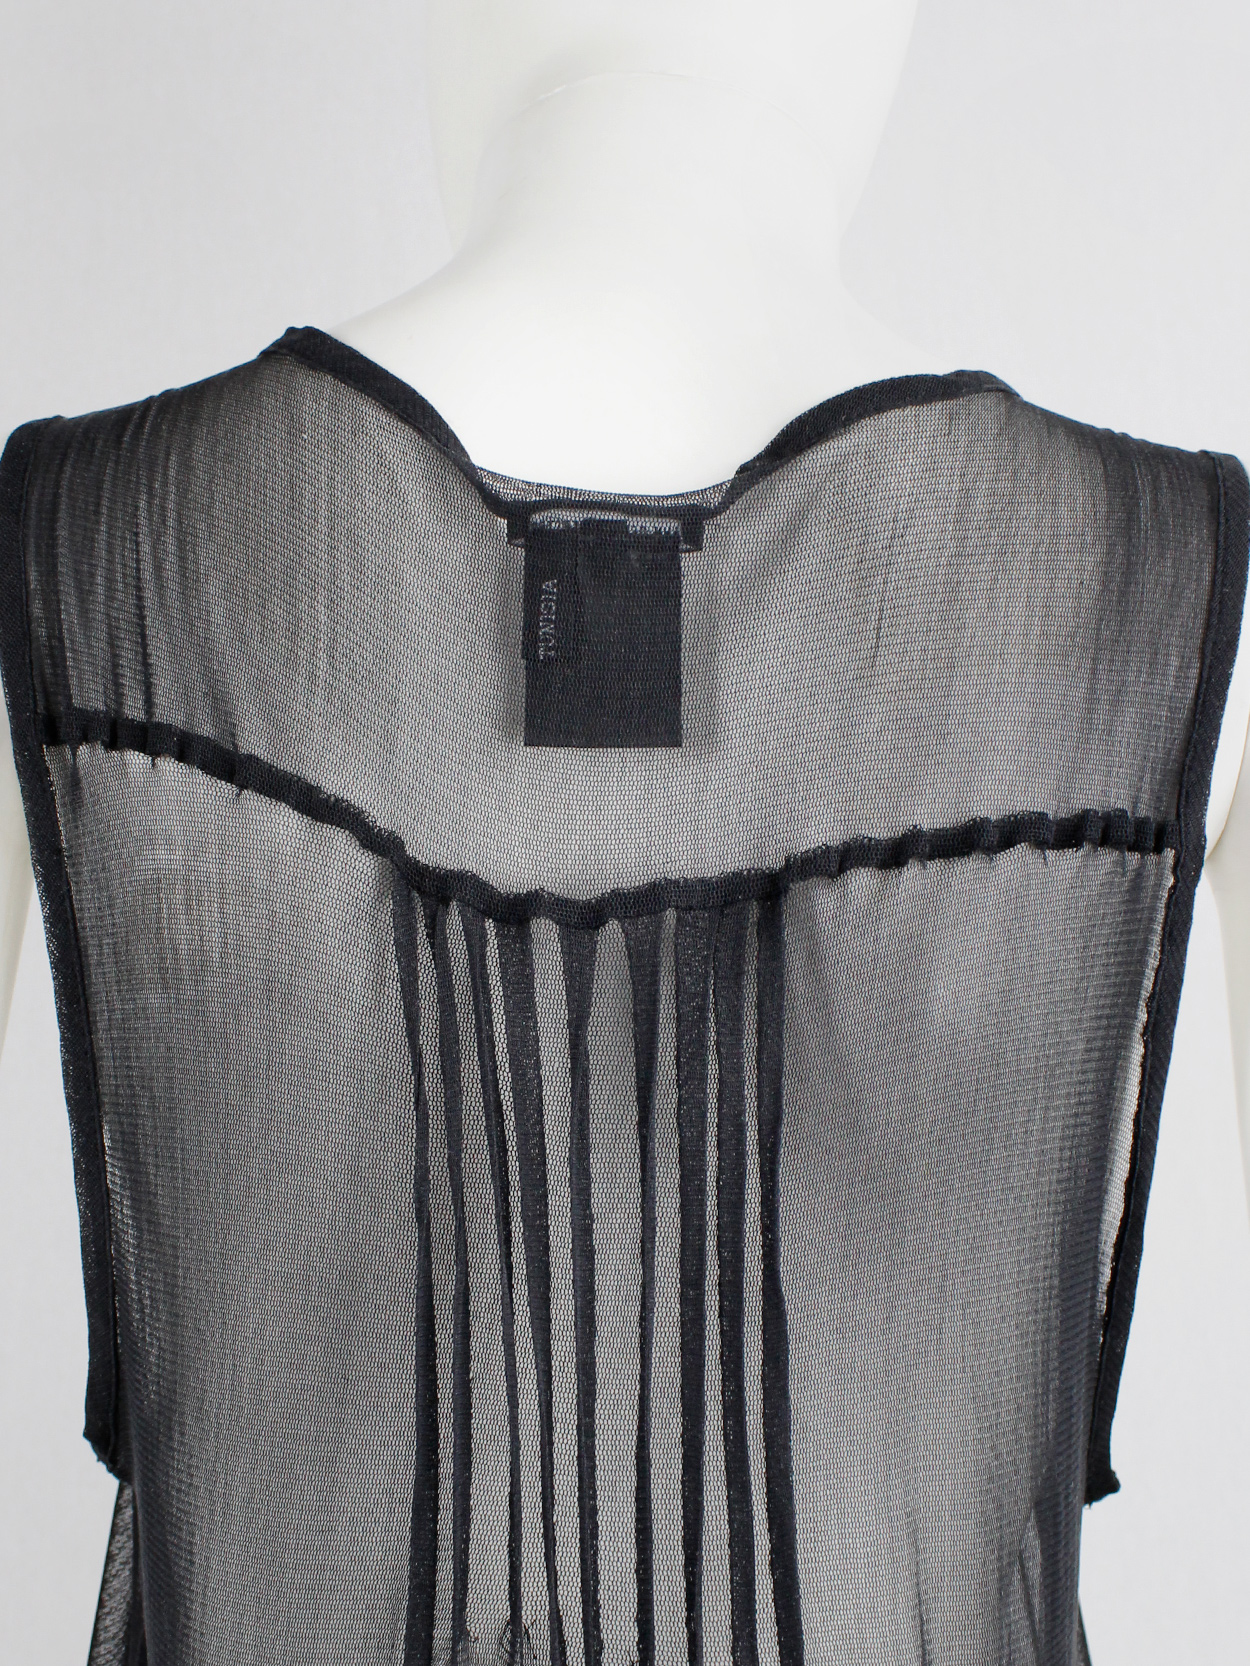 Ann Demeulemeester black long sheer top with pleated lines — fall 2013 - V A N II T A S